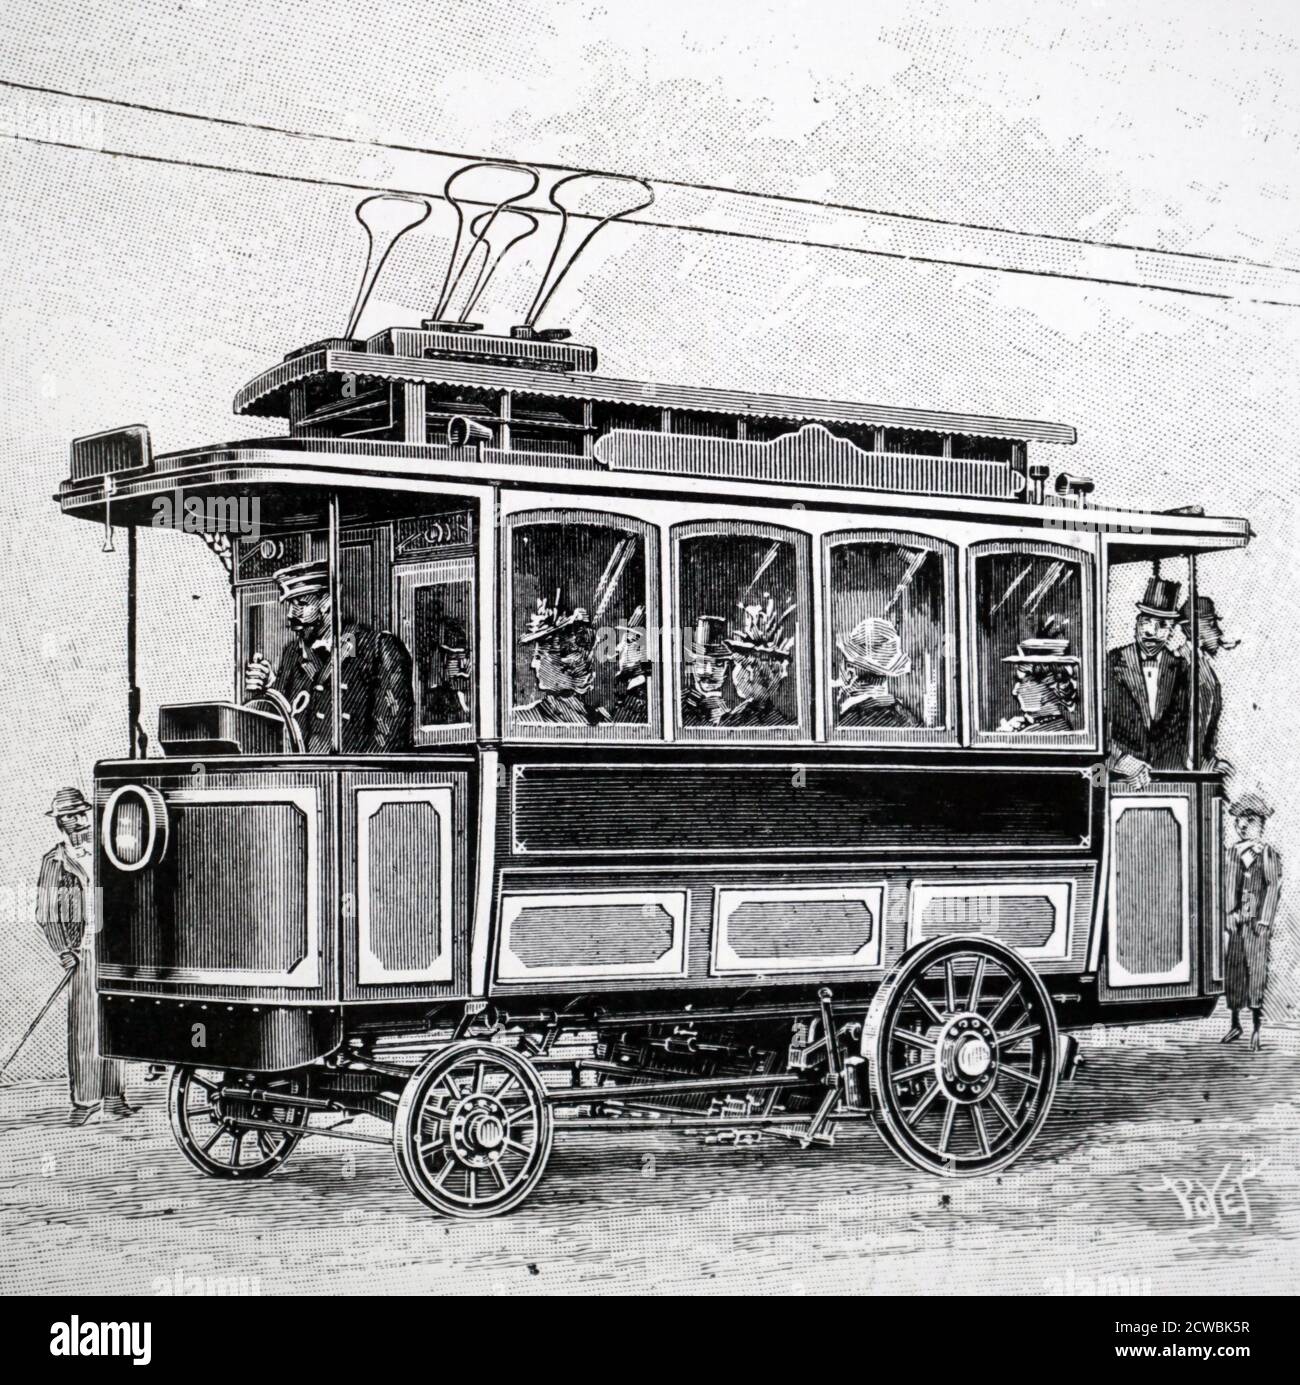 Engraving depicting an electric omnibus in Berlin with seating for 12 passengers inside, and standing room 6 at the rear. Fitted with 2 Siemens & Halske motors and 44 Pollak cells, it had a range of 16-18 km, but this was extended by partially recharging the batteries at bus stops using overhead lines as shown. Stock Photo